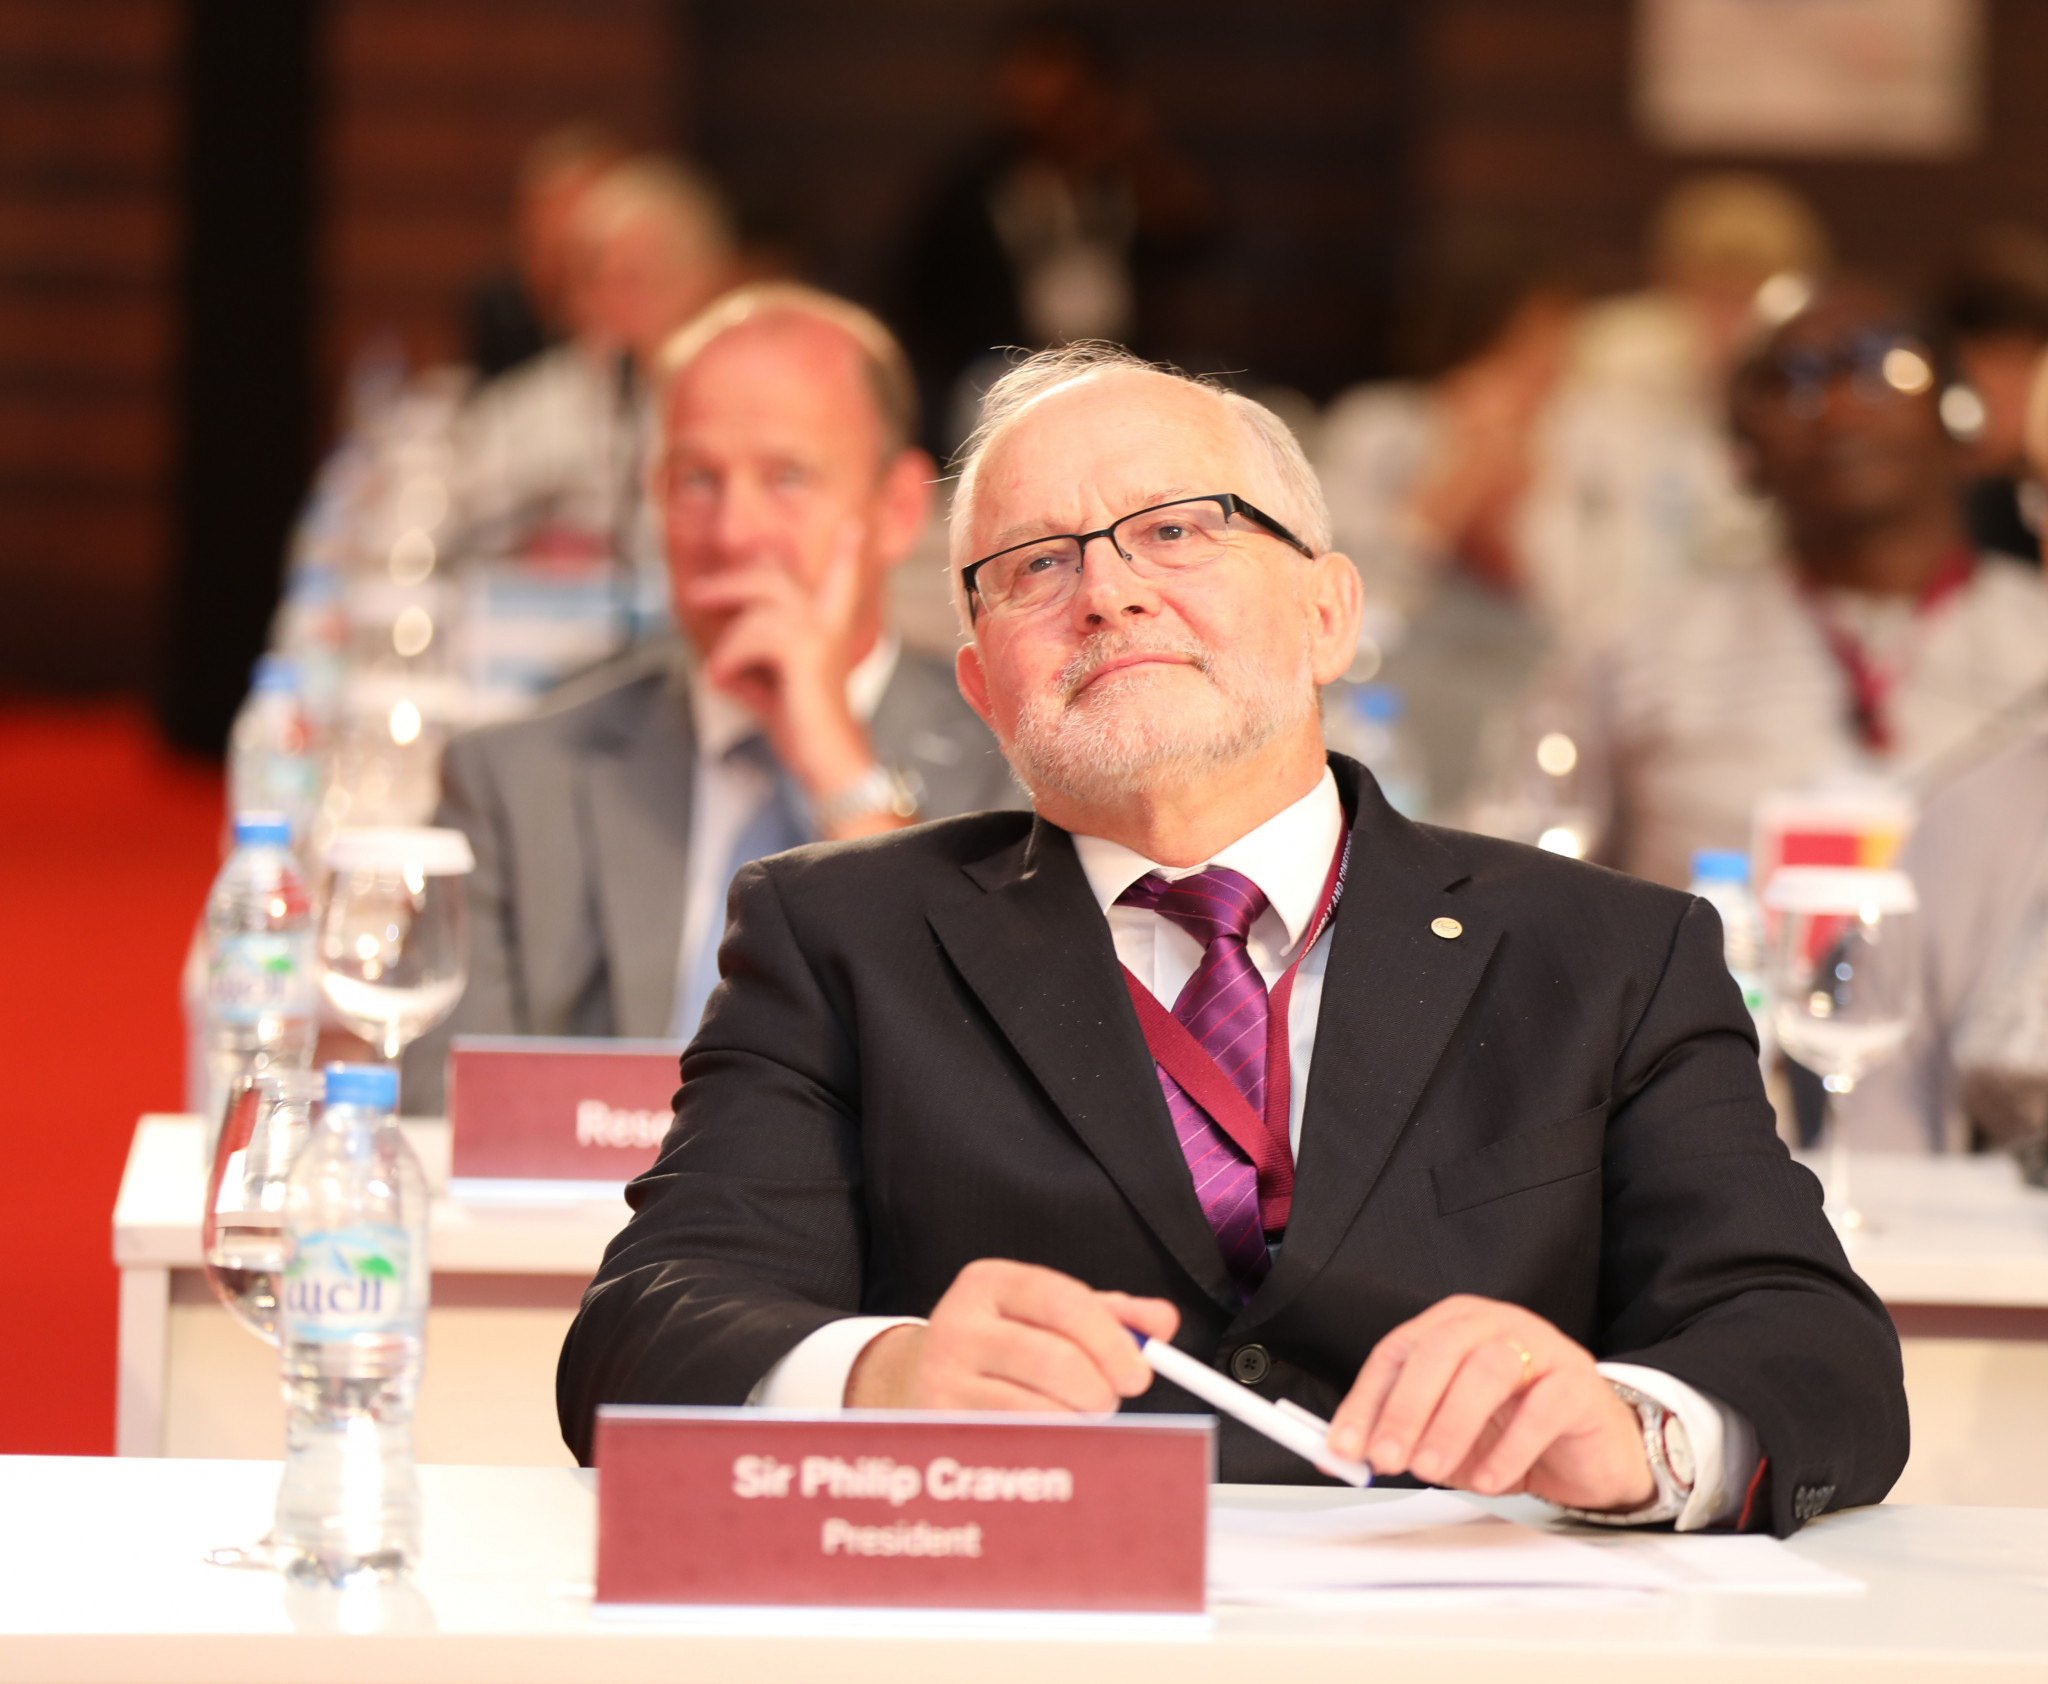 IPC President Sir Philip Craven has expressed his concern today that the Beijing 2022 Organising Committee is treating the Winter Paralympics as an "add-on" to the Olympics ©2017 IPC General Assembly LOC